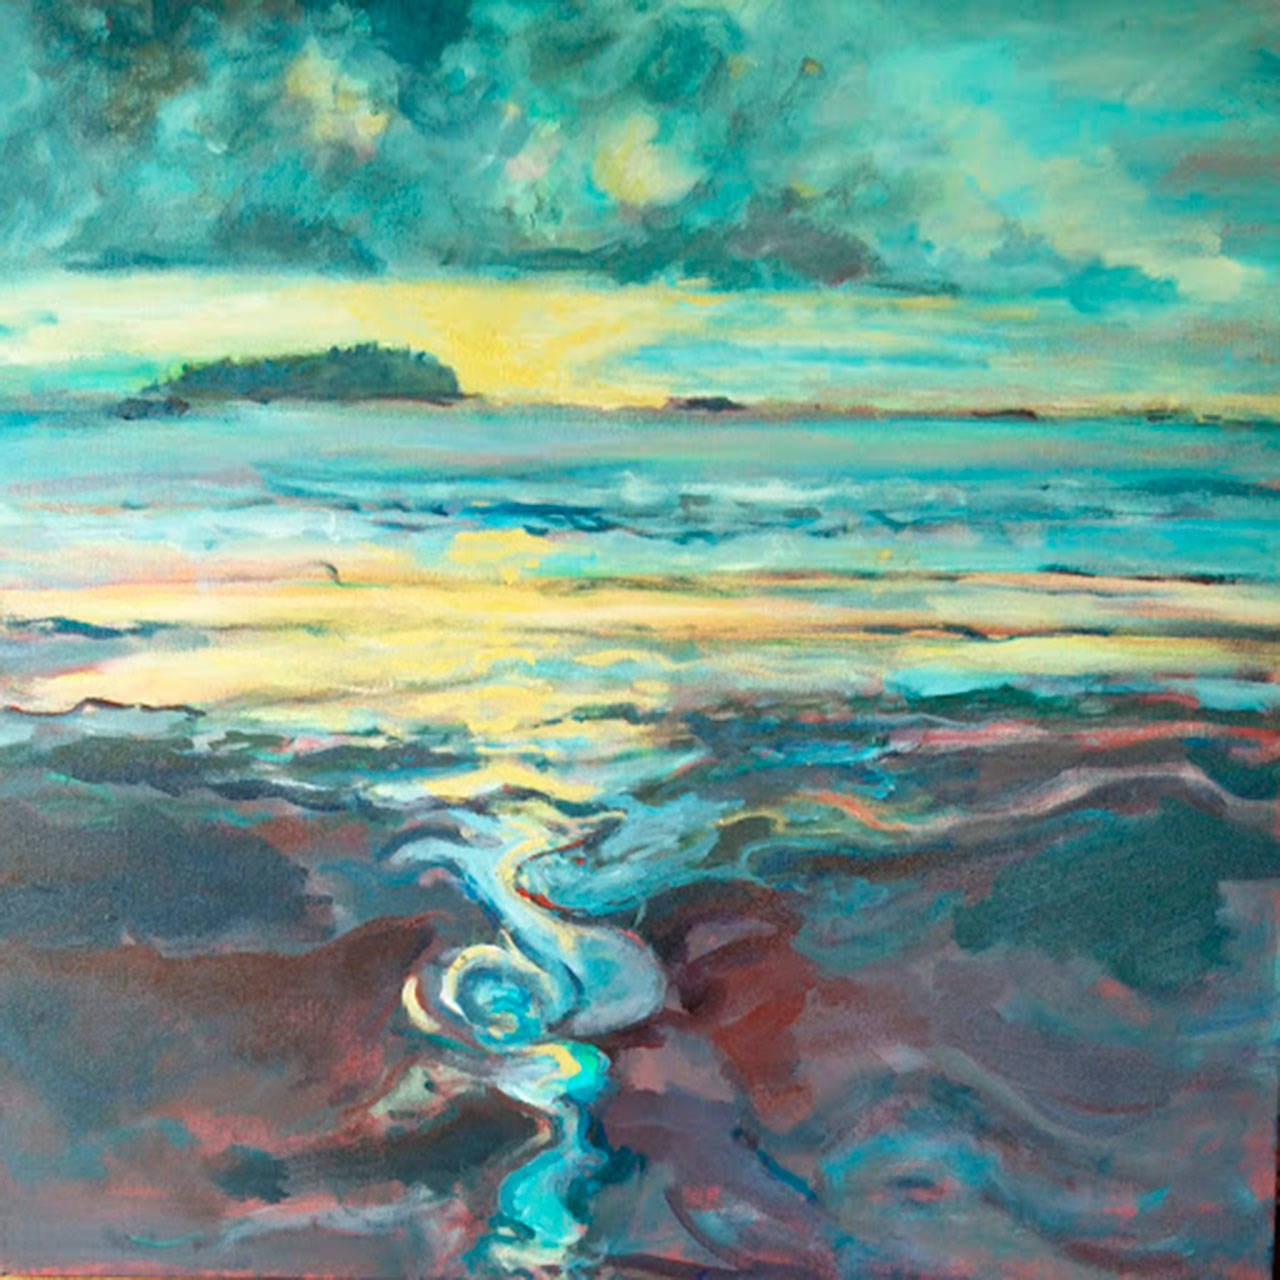 “Beach 2” by Lynne Armstrong, one of two featured artists at the Blue Whole Gallery in August, will be on display during Friday Friday Art Walk Sequim.